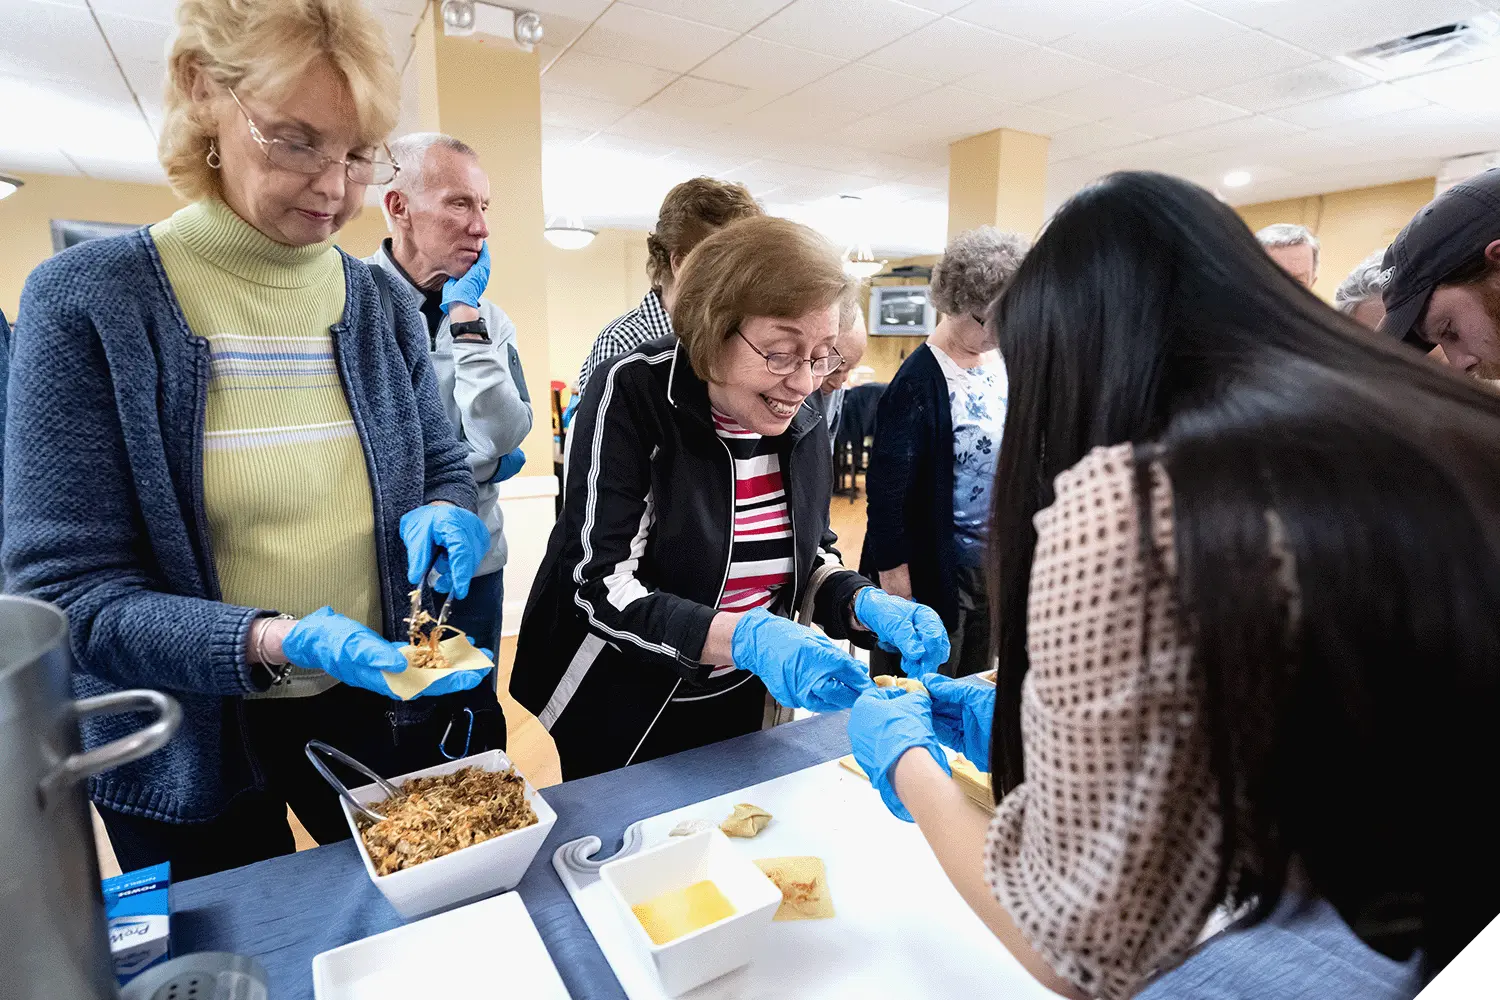 Marietta College Institute for Learning in Retirement students make wontons as part of a class